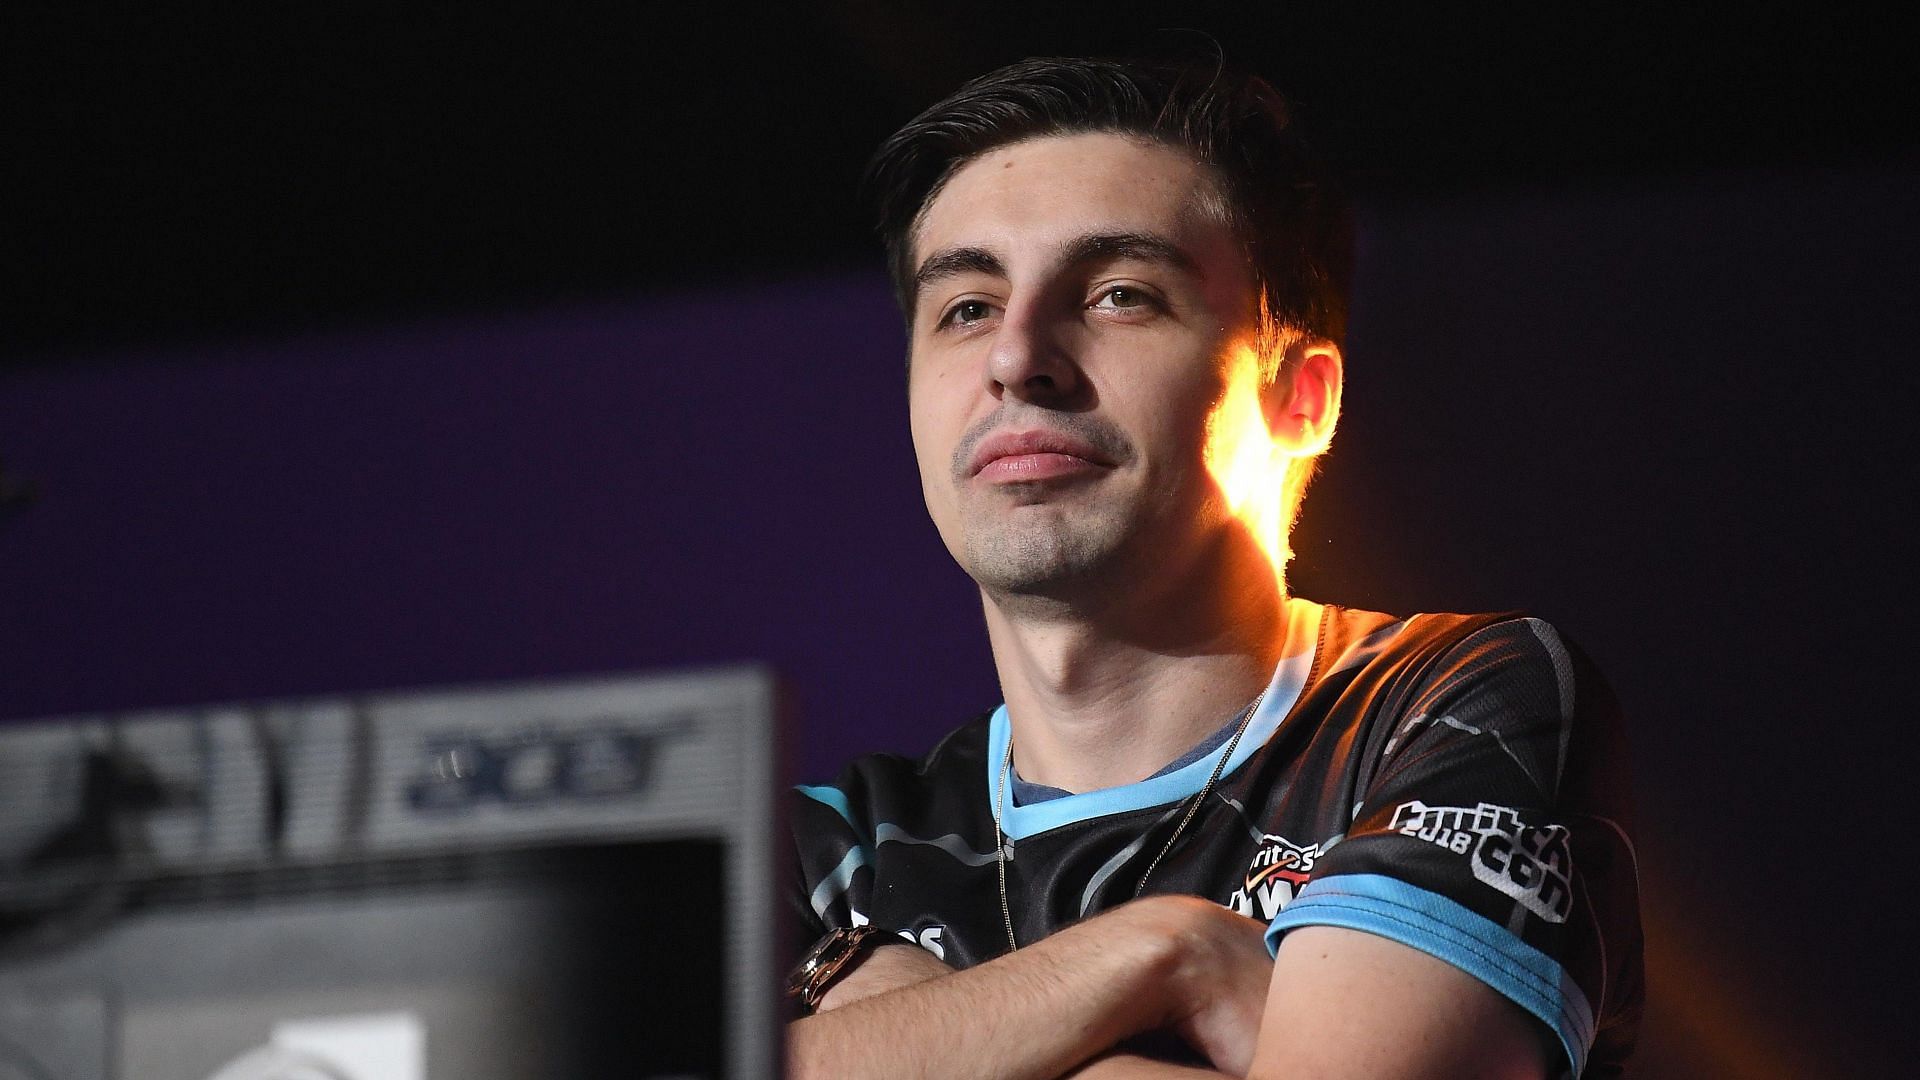 Viewership records would break if Shroud decides to come back to the game (Image via Forbes/Twitter)